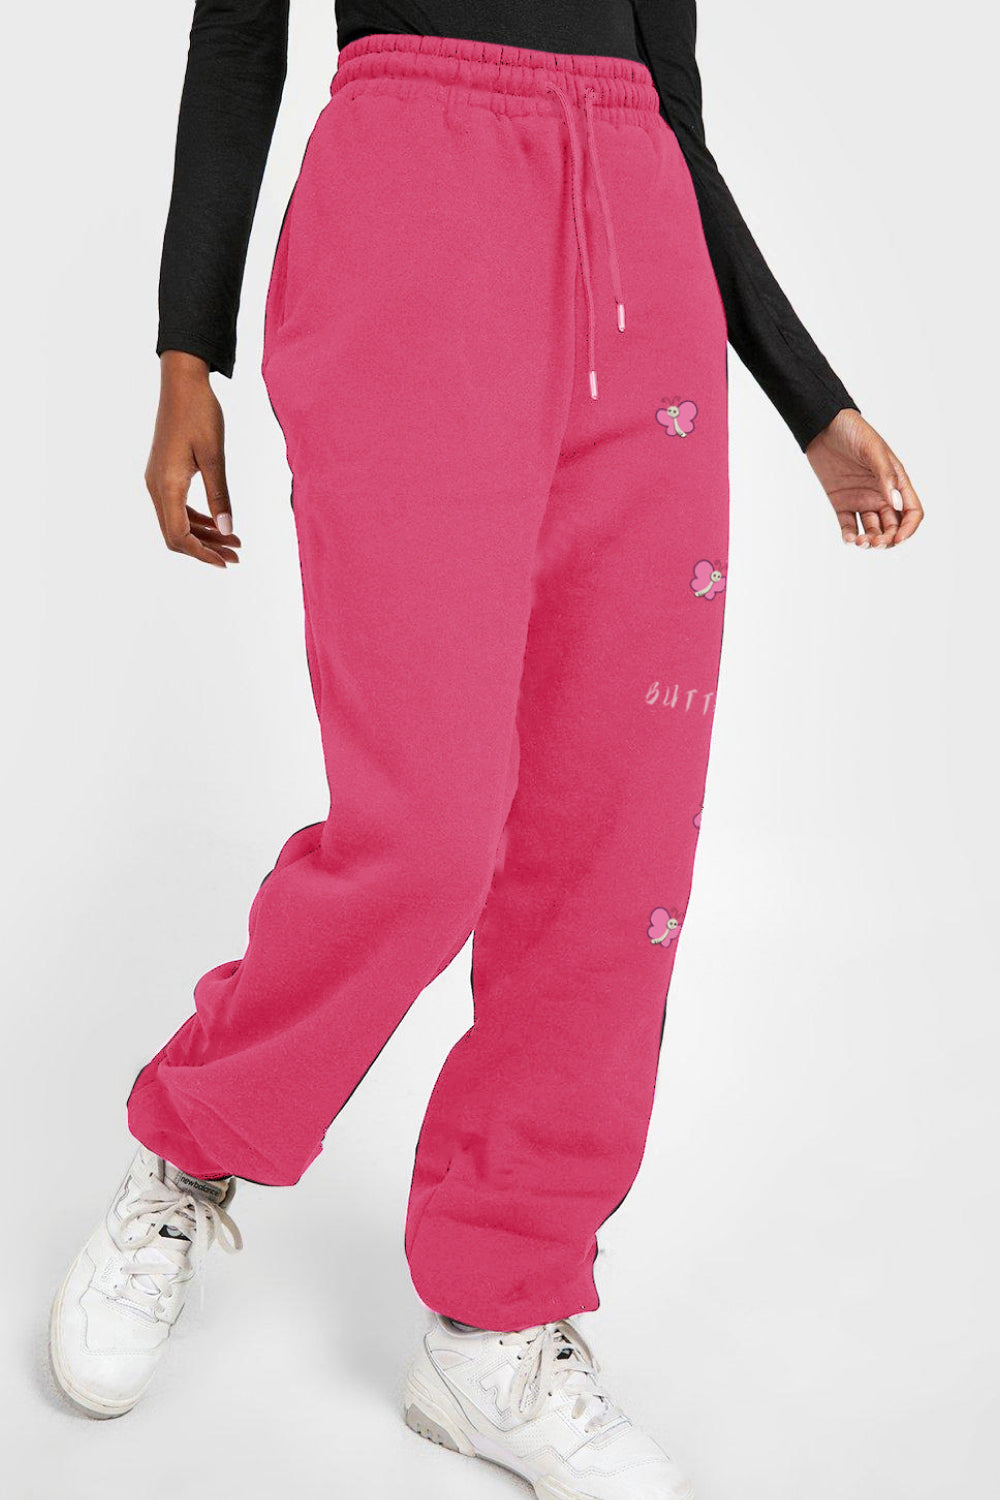 Maroon Simply Love Full Size Drawstring BUTTERFLY Graphic Long Sweatpants Sentient Beauty Fashions Apparel & Accessories